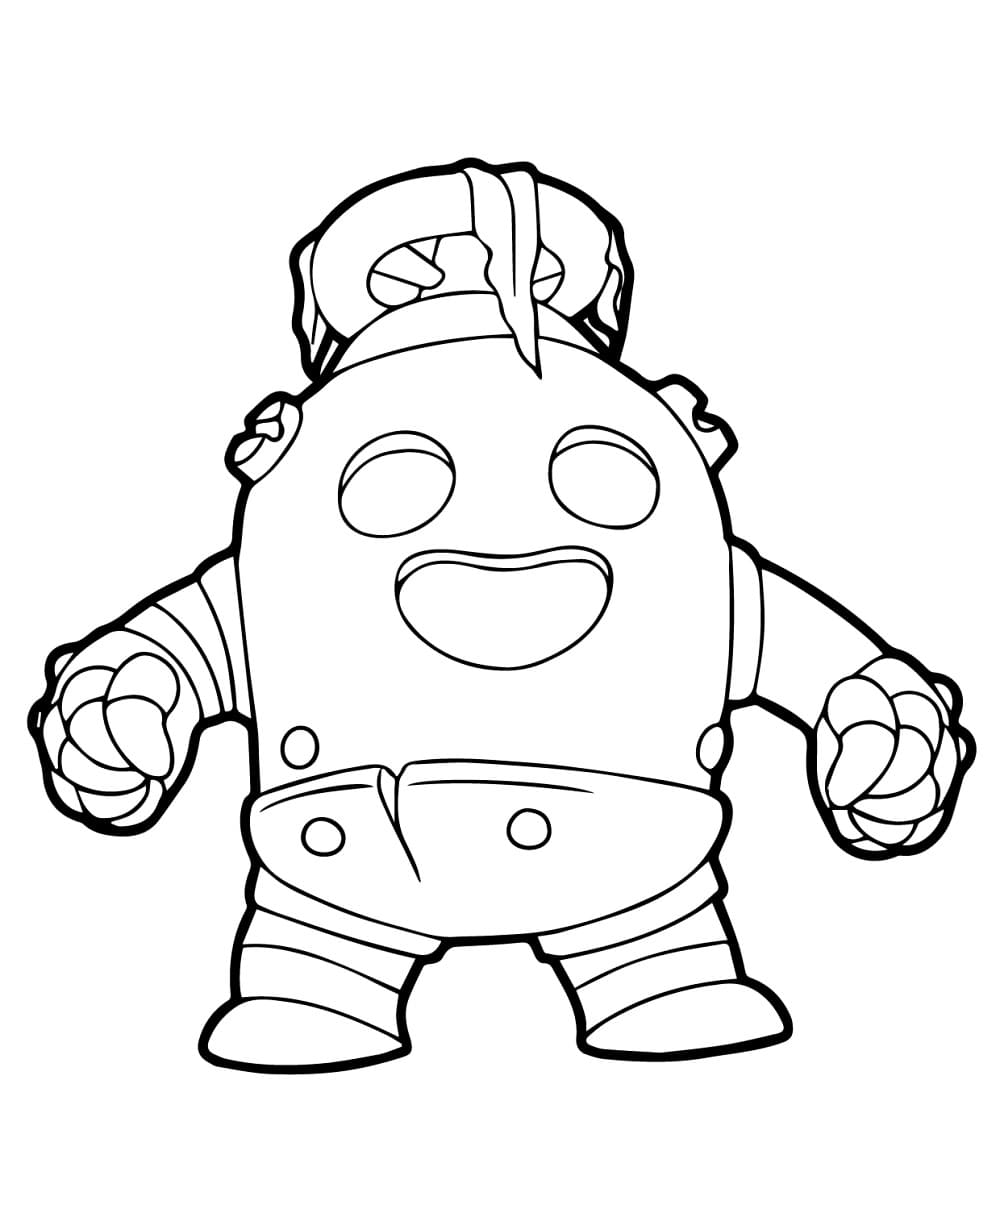 Spike And Spike Sakura Coloring Pages Brawl Stars Print A4 - brawl stars para colorear sprout